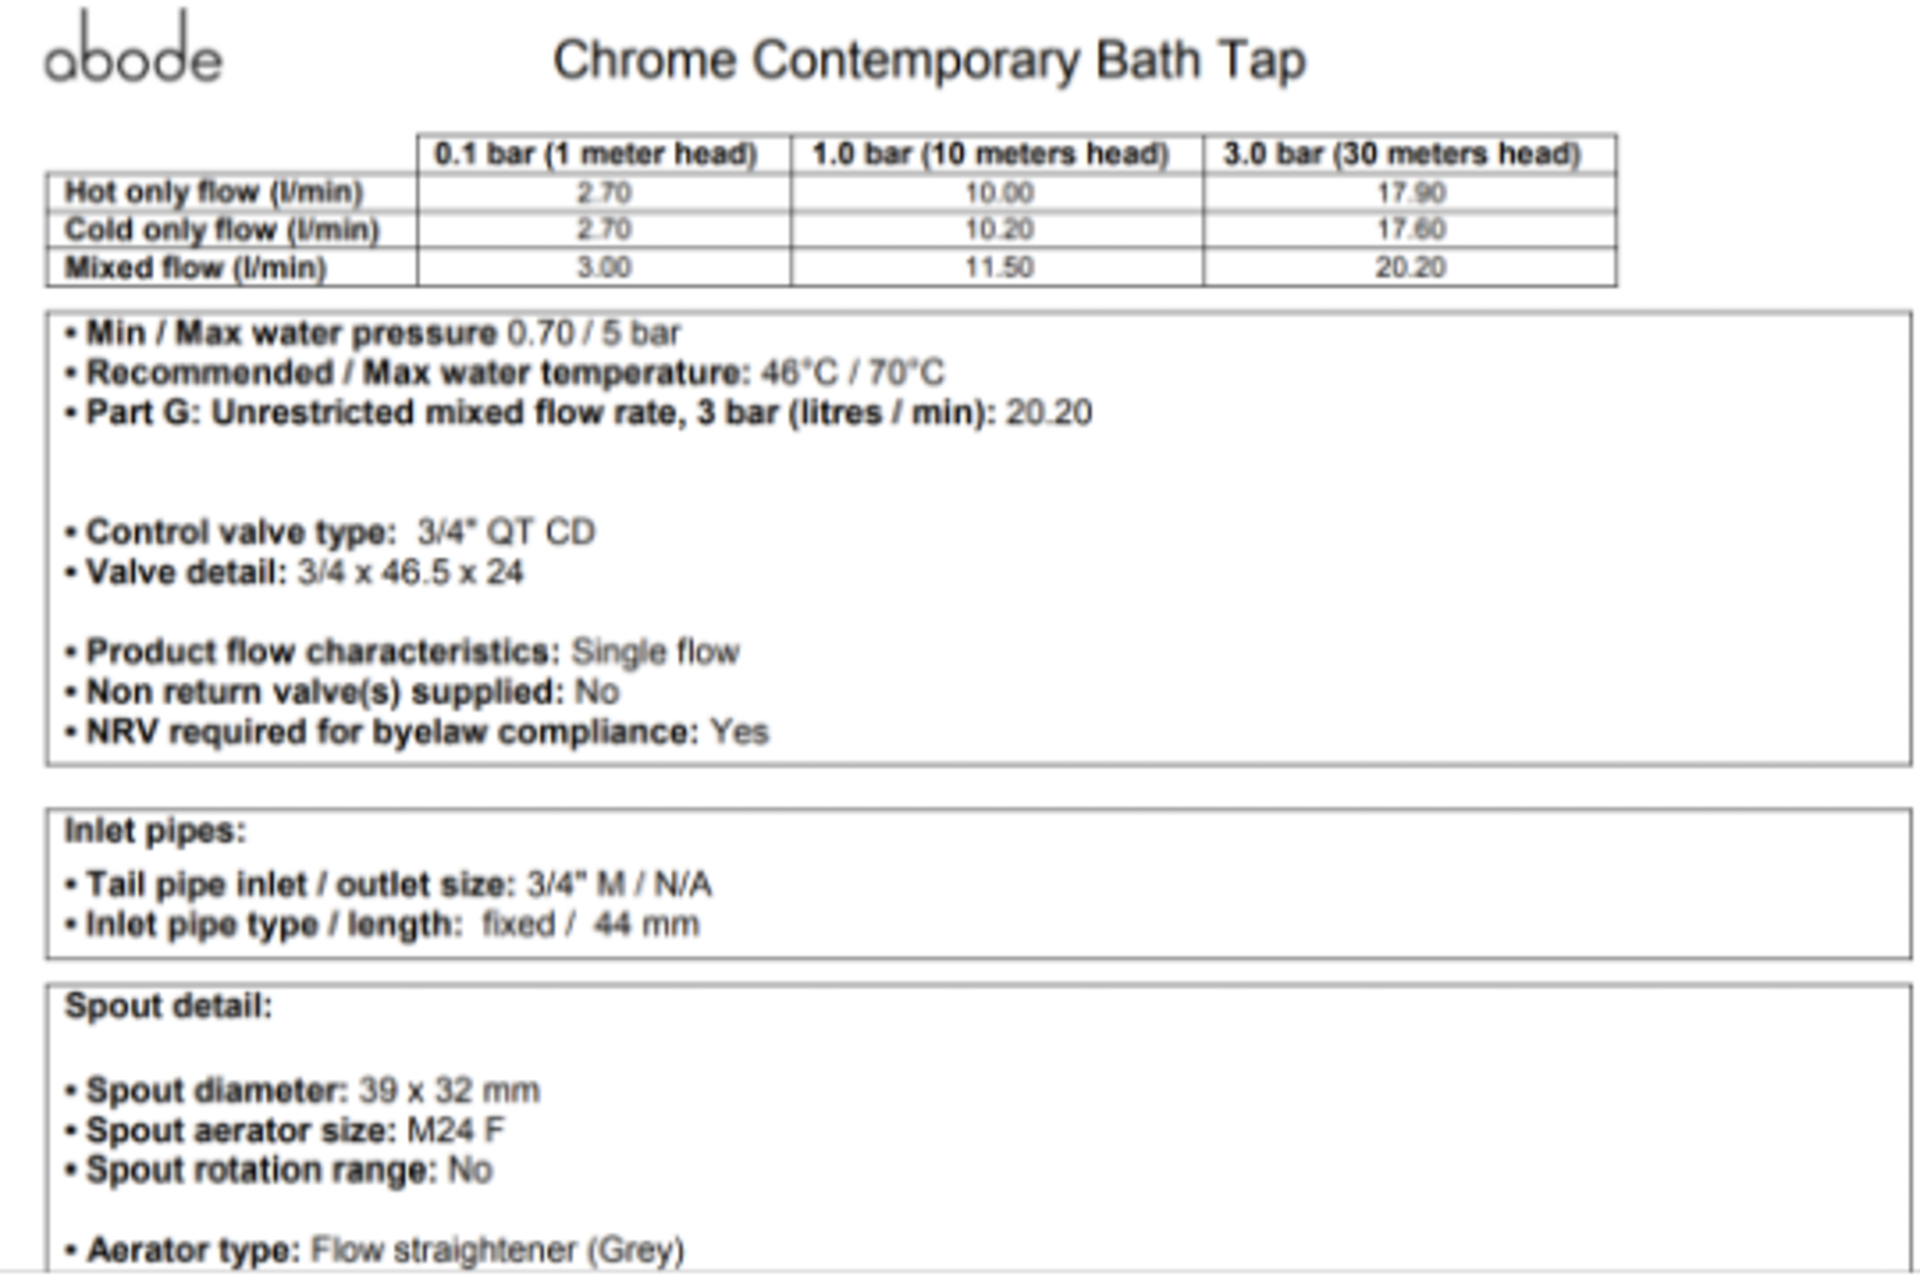 12 x NEW BOXED CONTEMPORARY Abode Lamona CHROME BATH TAPS. RRP £129.99 EACH, GIVING THIS LOT A TOTAL - Image 4 of 4